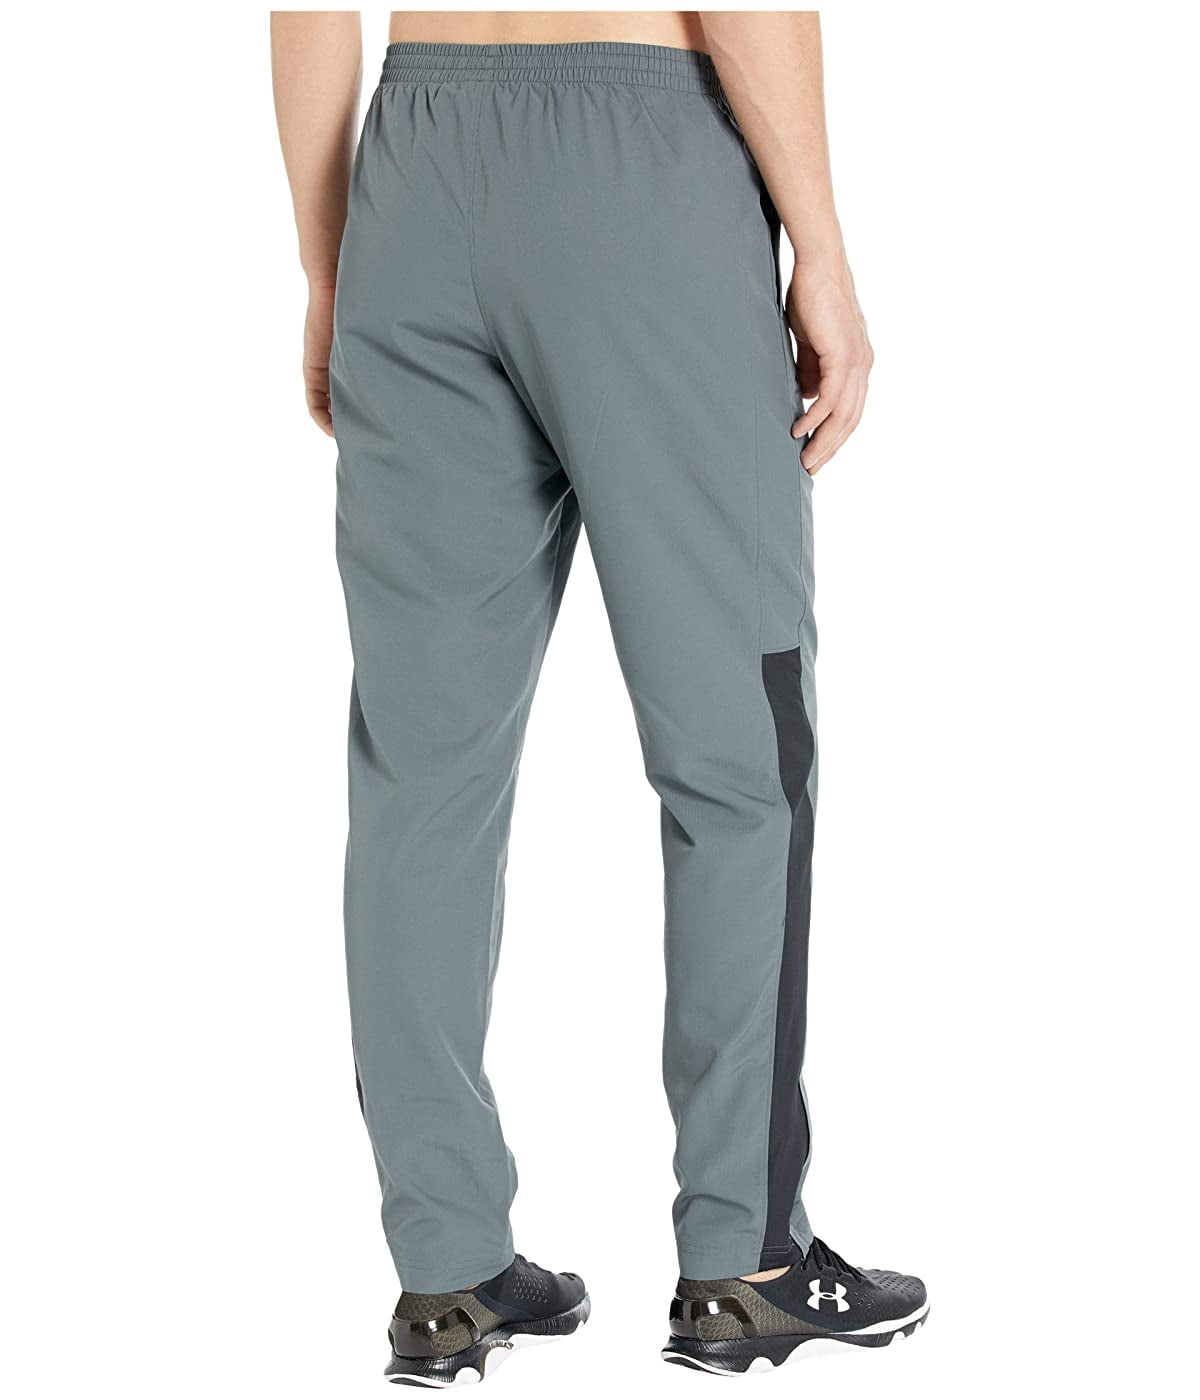 Under Armour Men's Vital Woven Pants # Small